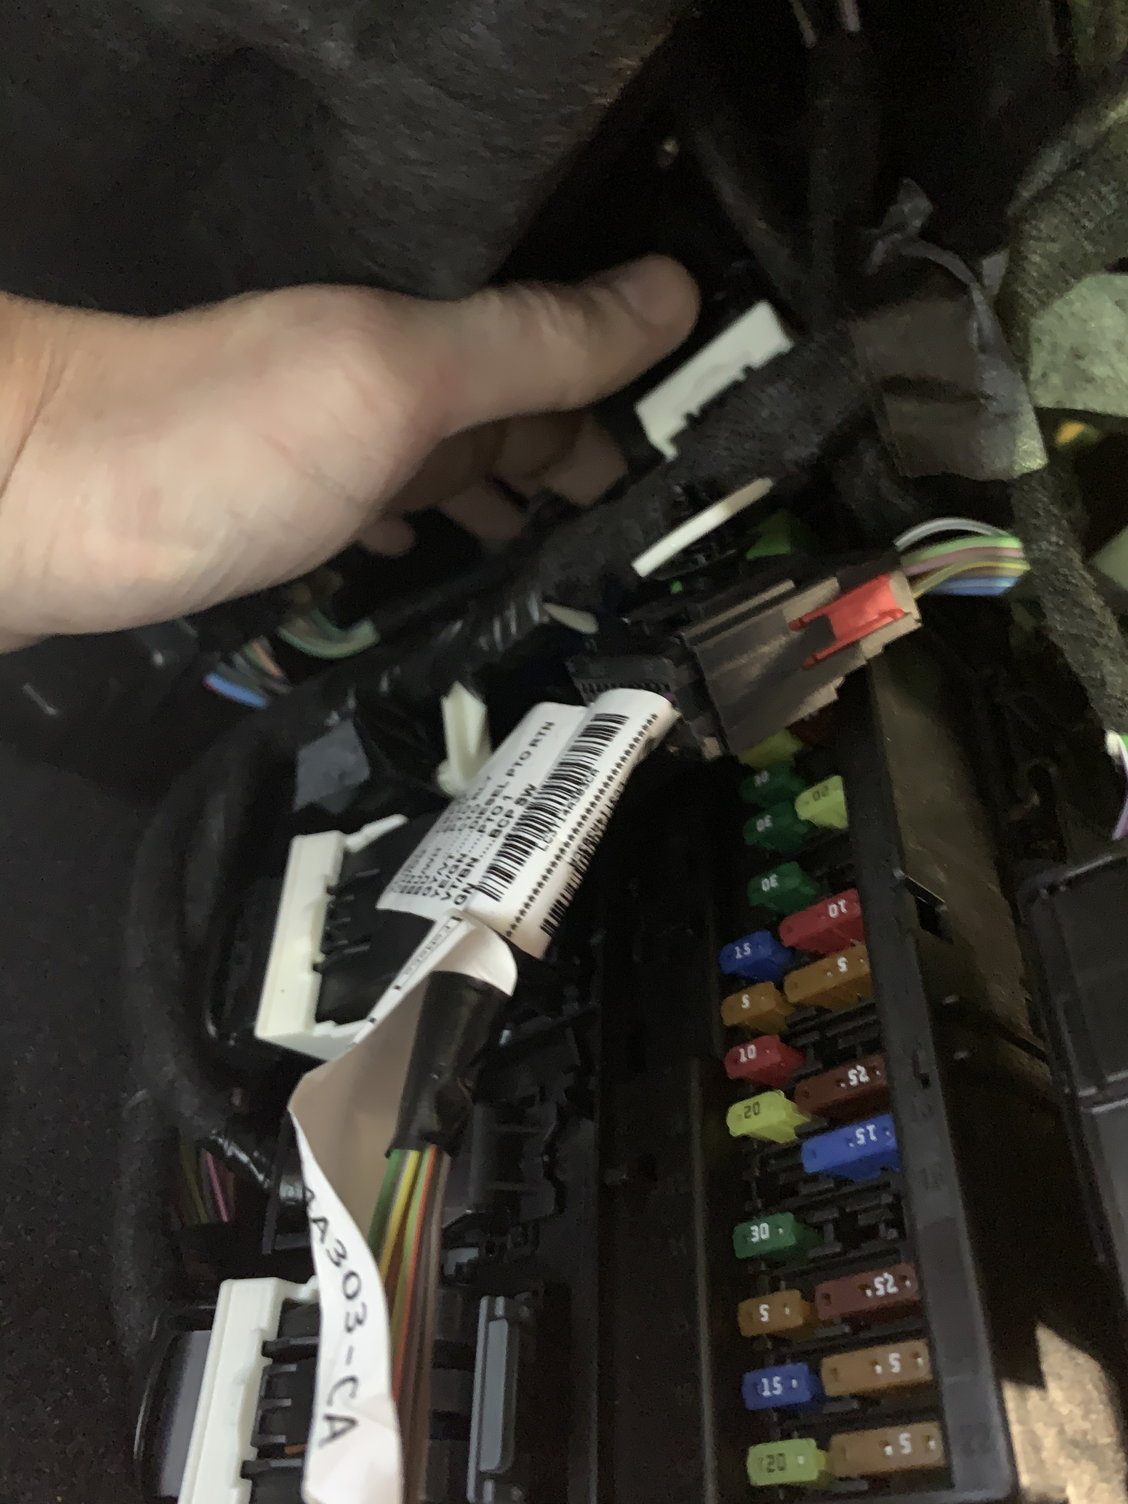 2020 Upfitter switch wiring - Page 2 - Ford Truck Enthusiasts Forums